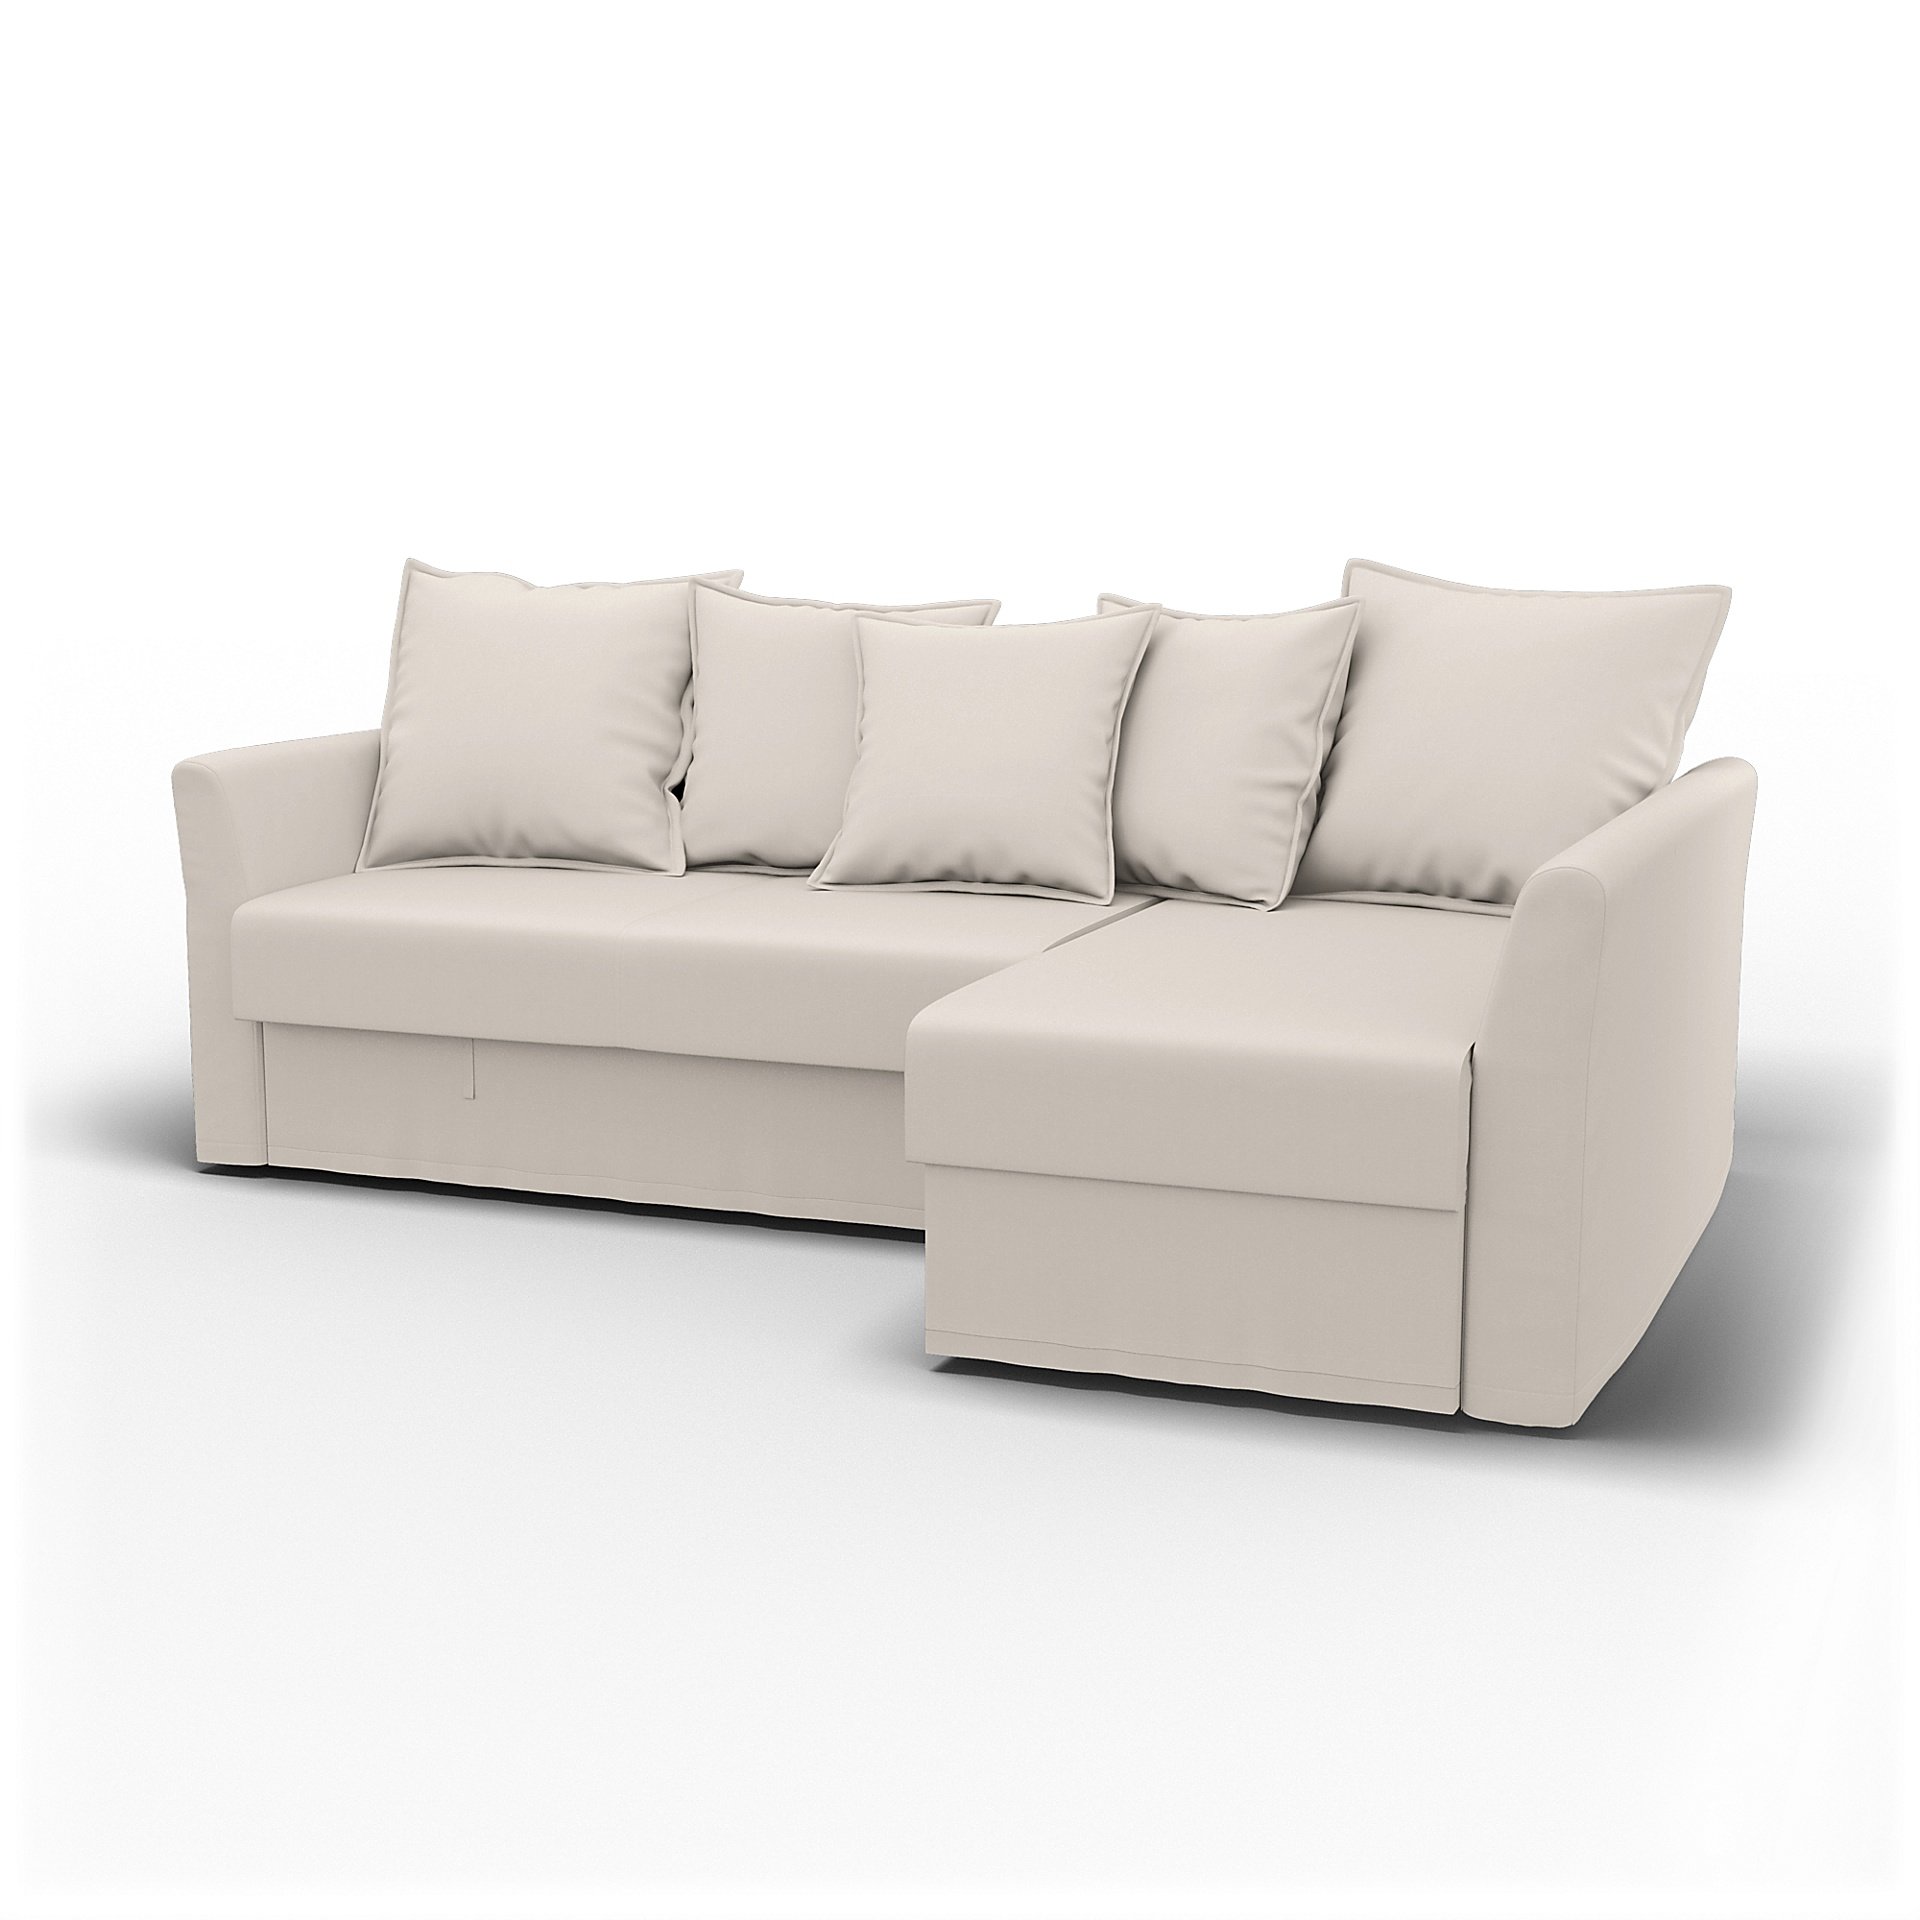 IKEA - Holmsund Sofabed with Chaiselongue, Soft White, Cotton - Bemz